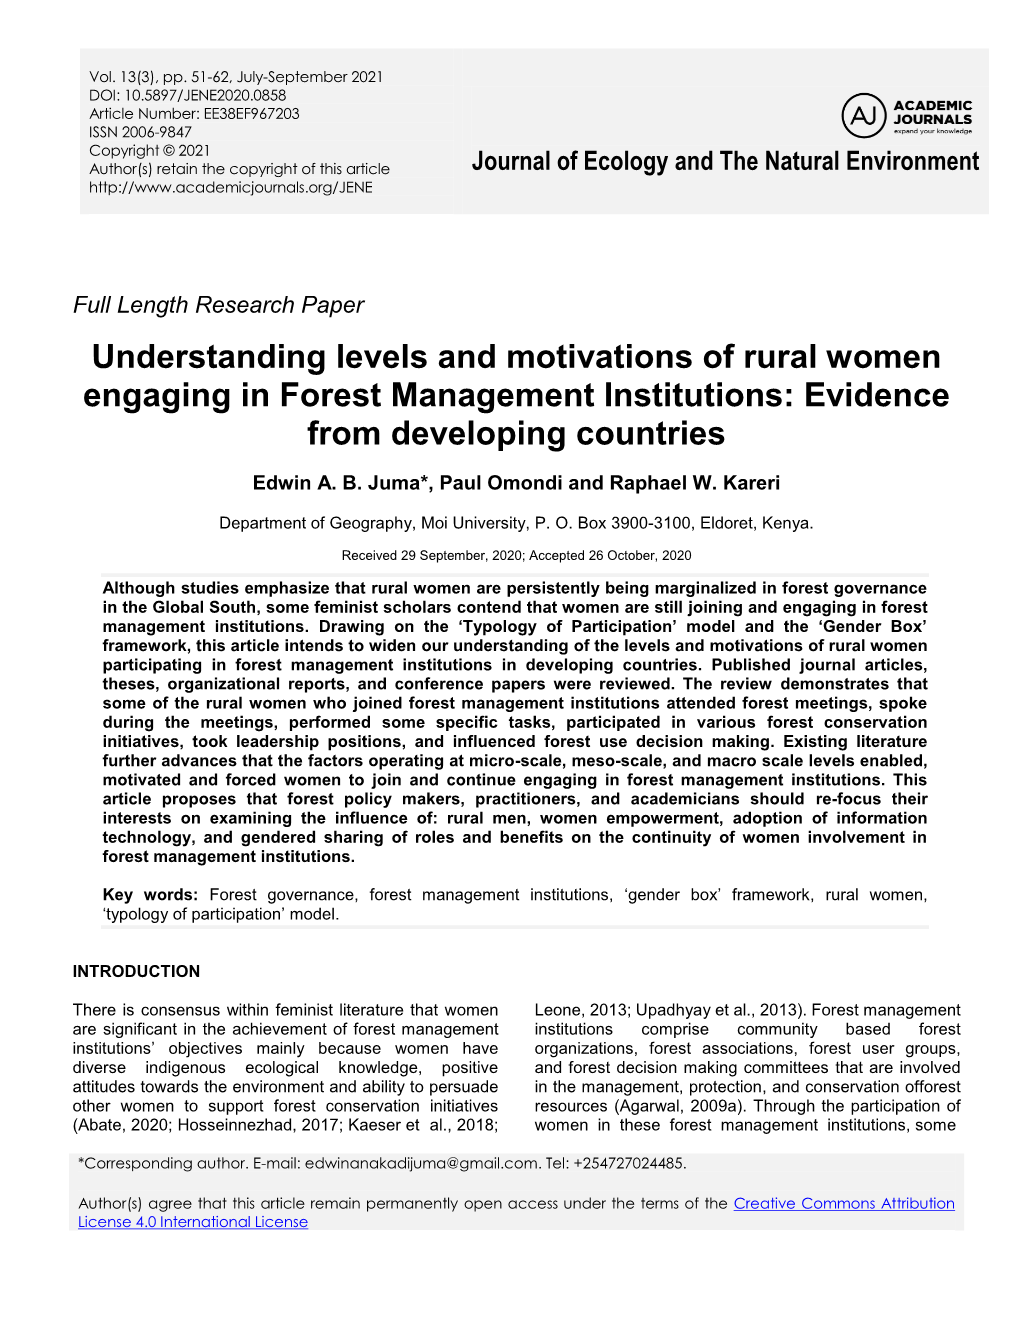 Understanding Levels and Motivations of Rural Women Engaging in Forest Management Institutions: Evidence from Developing Countries